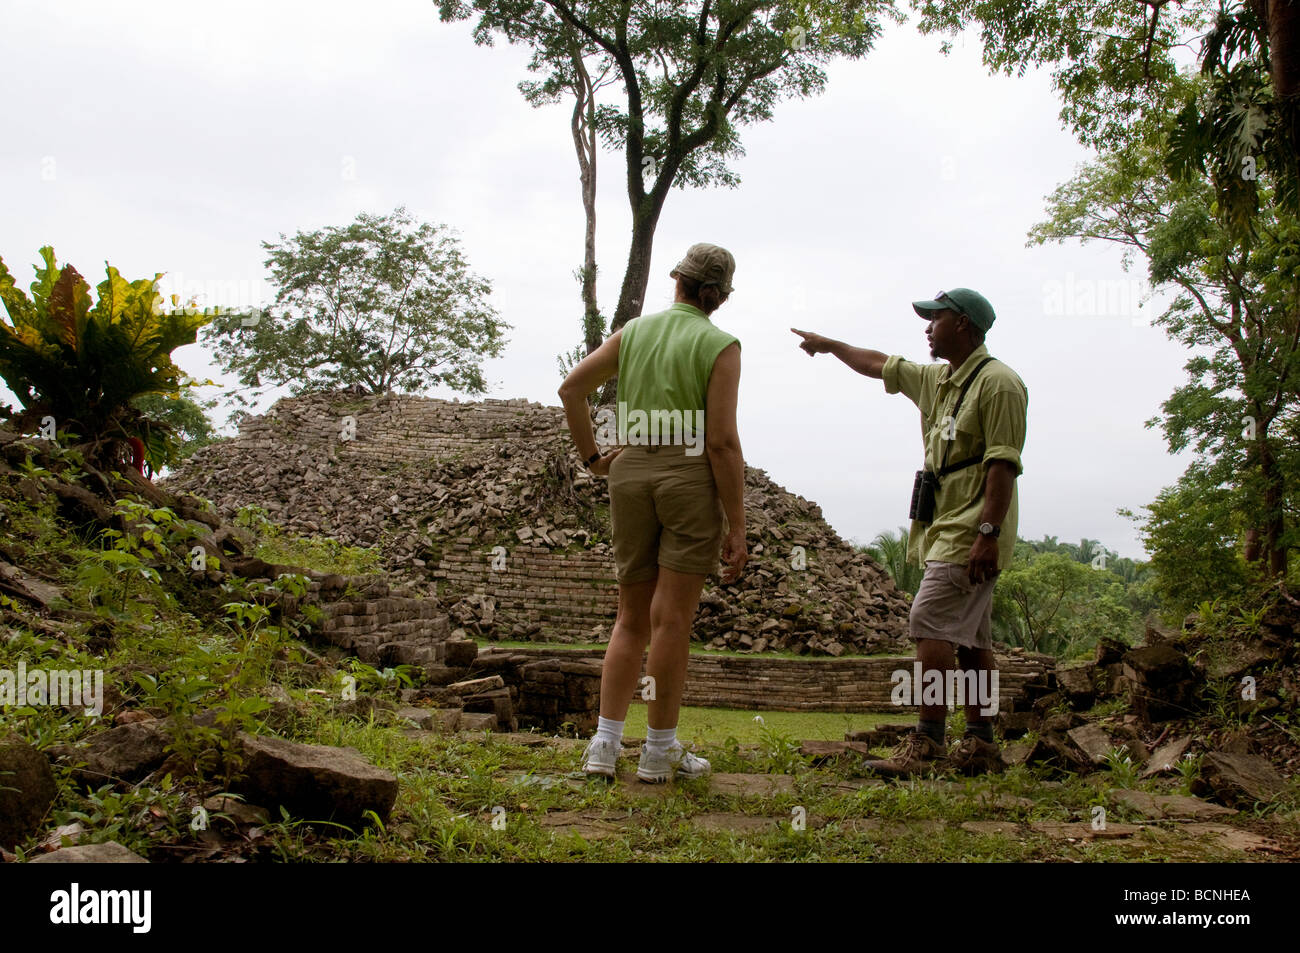 The archaeological features of the Mayan ruins Lubaantun near the southern Belize town of Punta Gorda are interesting. Stock Photo